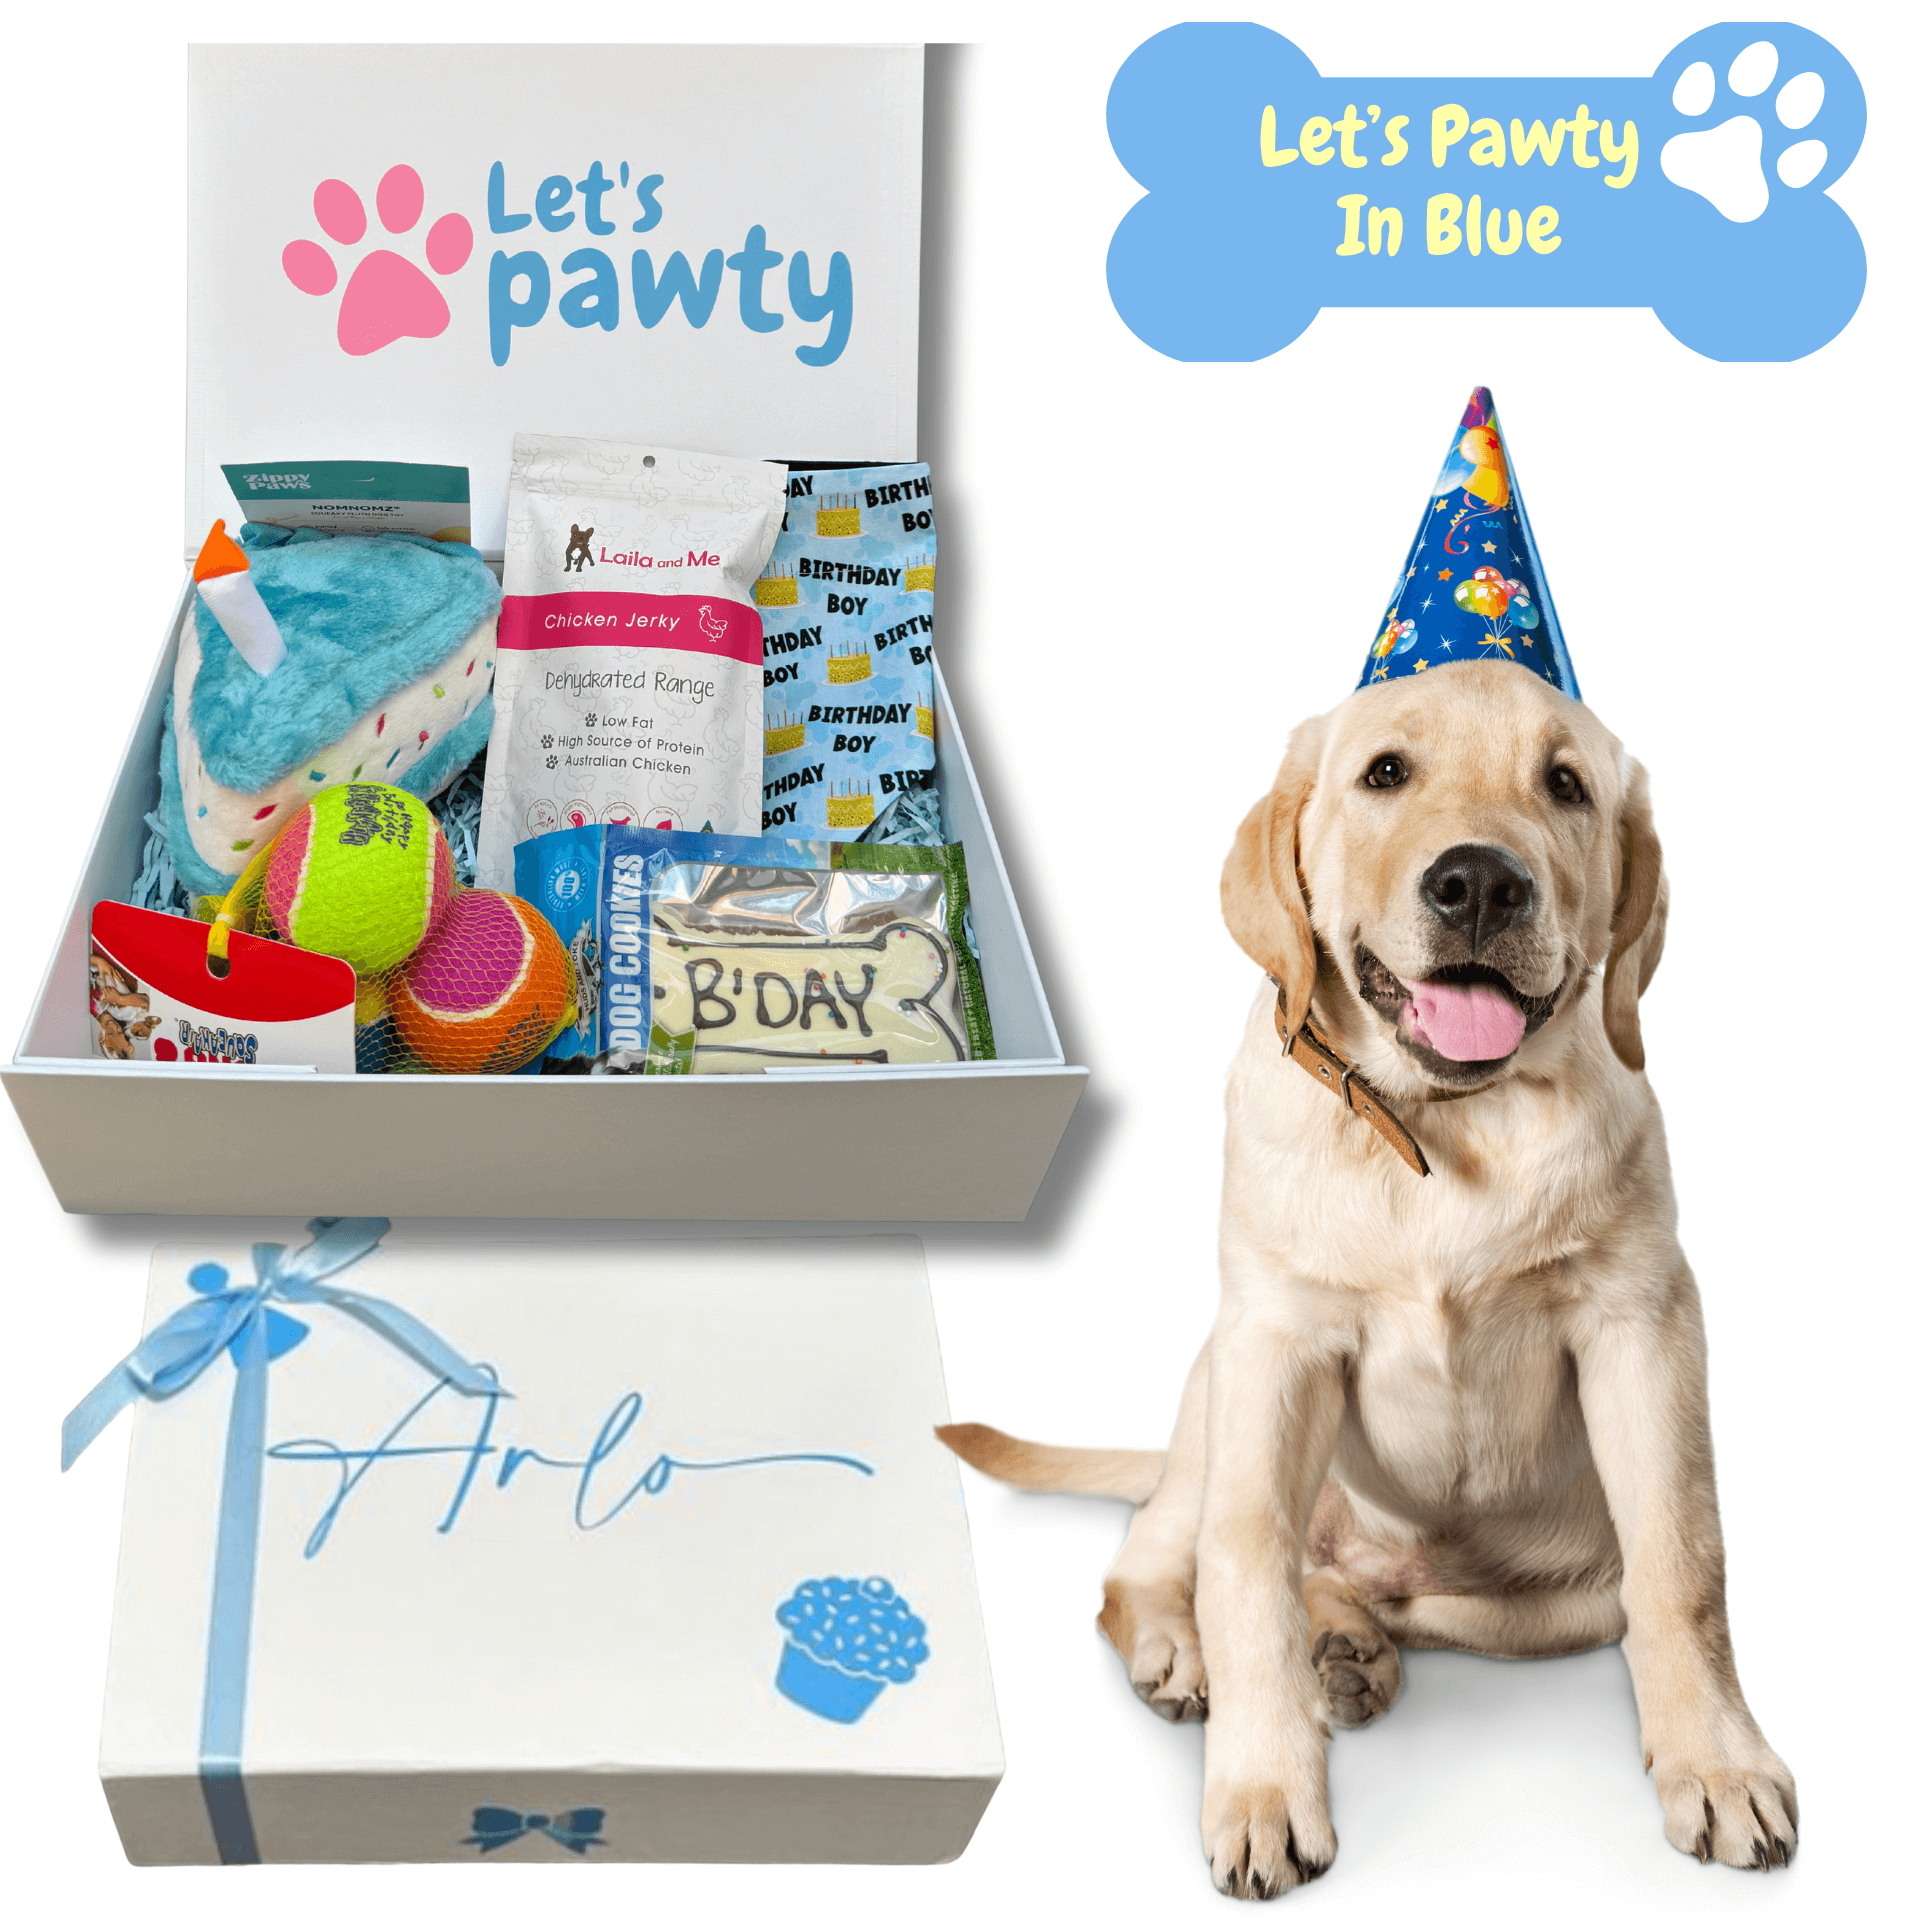 dog birthday birthday box, dog birthday box party gift boxes Let's Pawty Sydney